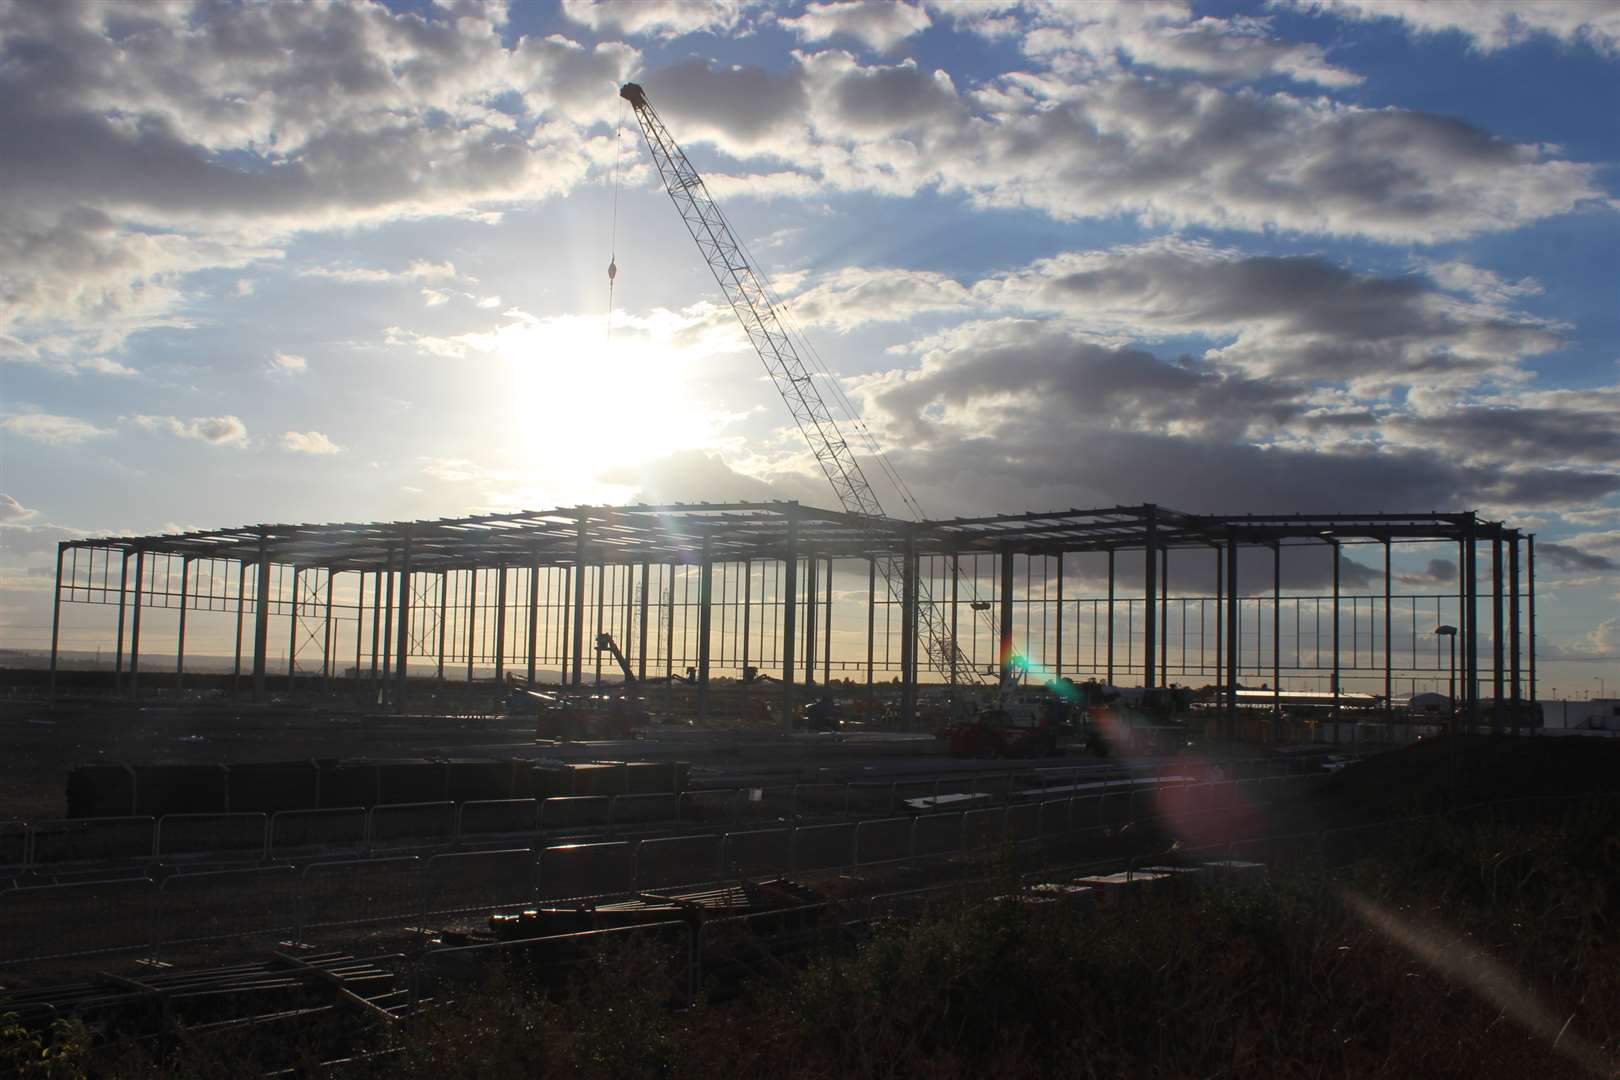 Silhouette of the new Aldi distribution depot being built at Neats Court, Queenborough